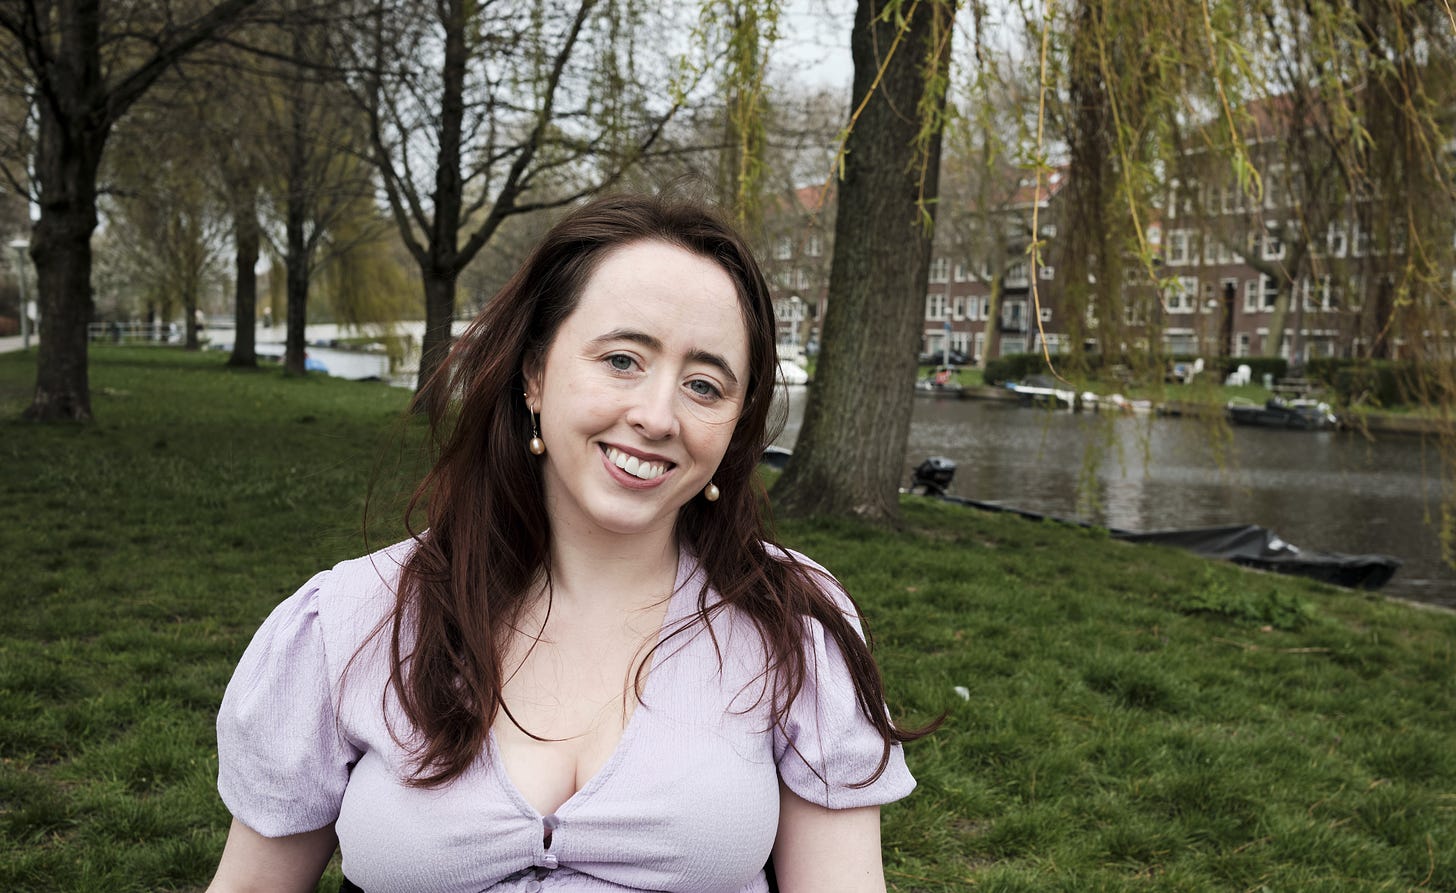 Niamh, an Irish woman with long dark brown hair is wearing a mauve top and smiling into the camera. She is sitting in a garden with trees lining a water body. Brown buildings with windows can be seen in the background. 